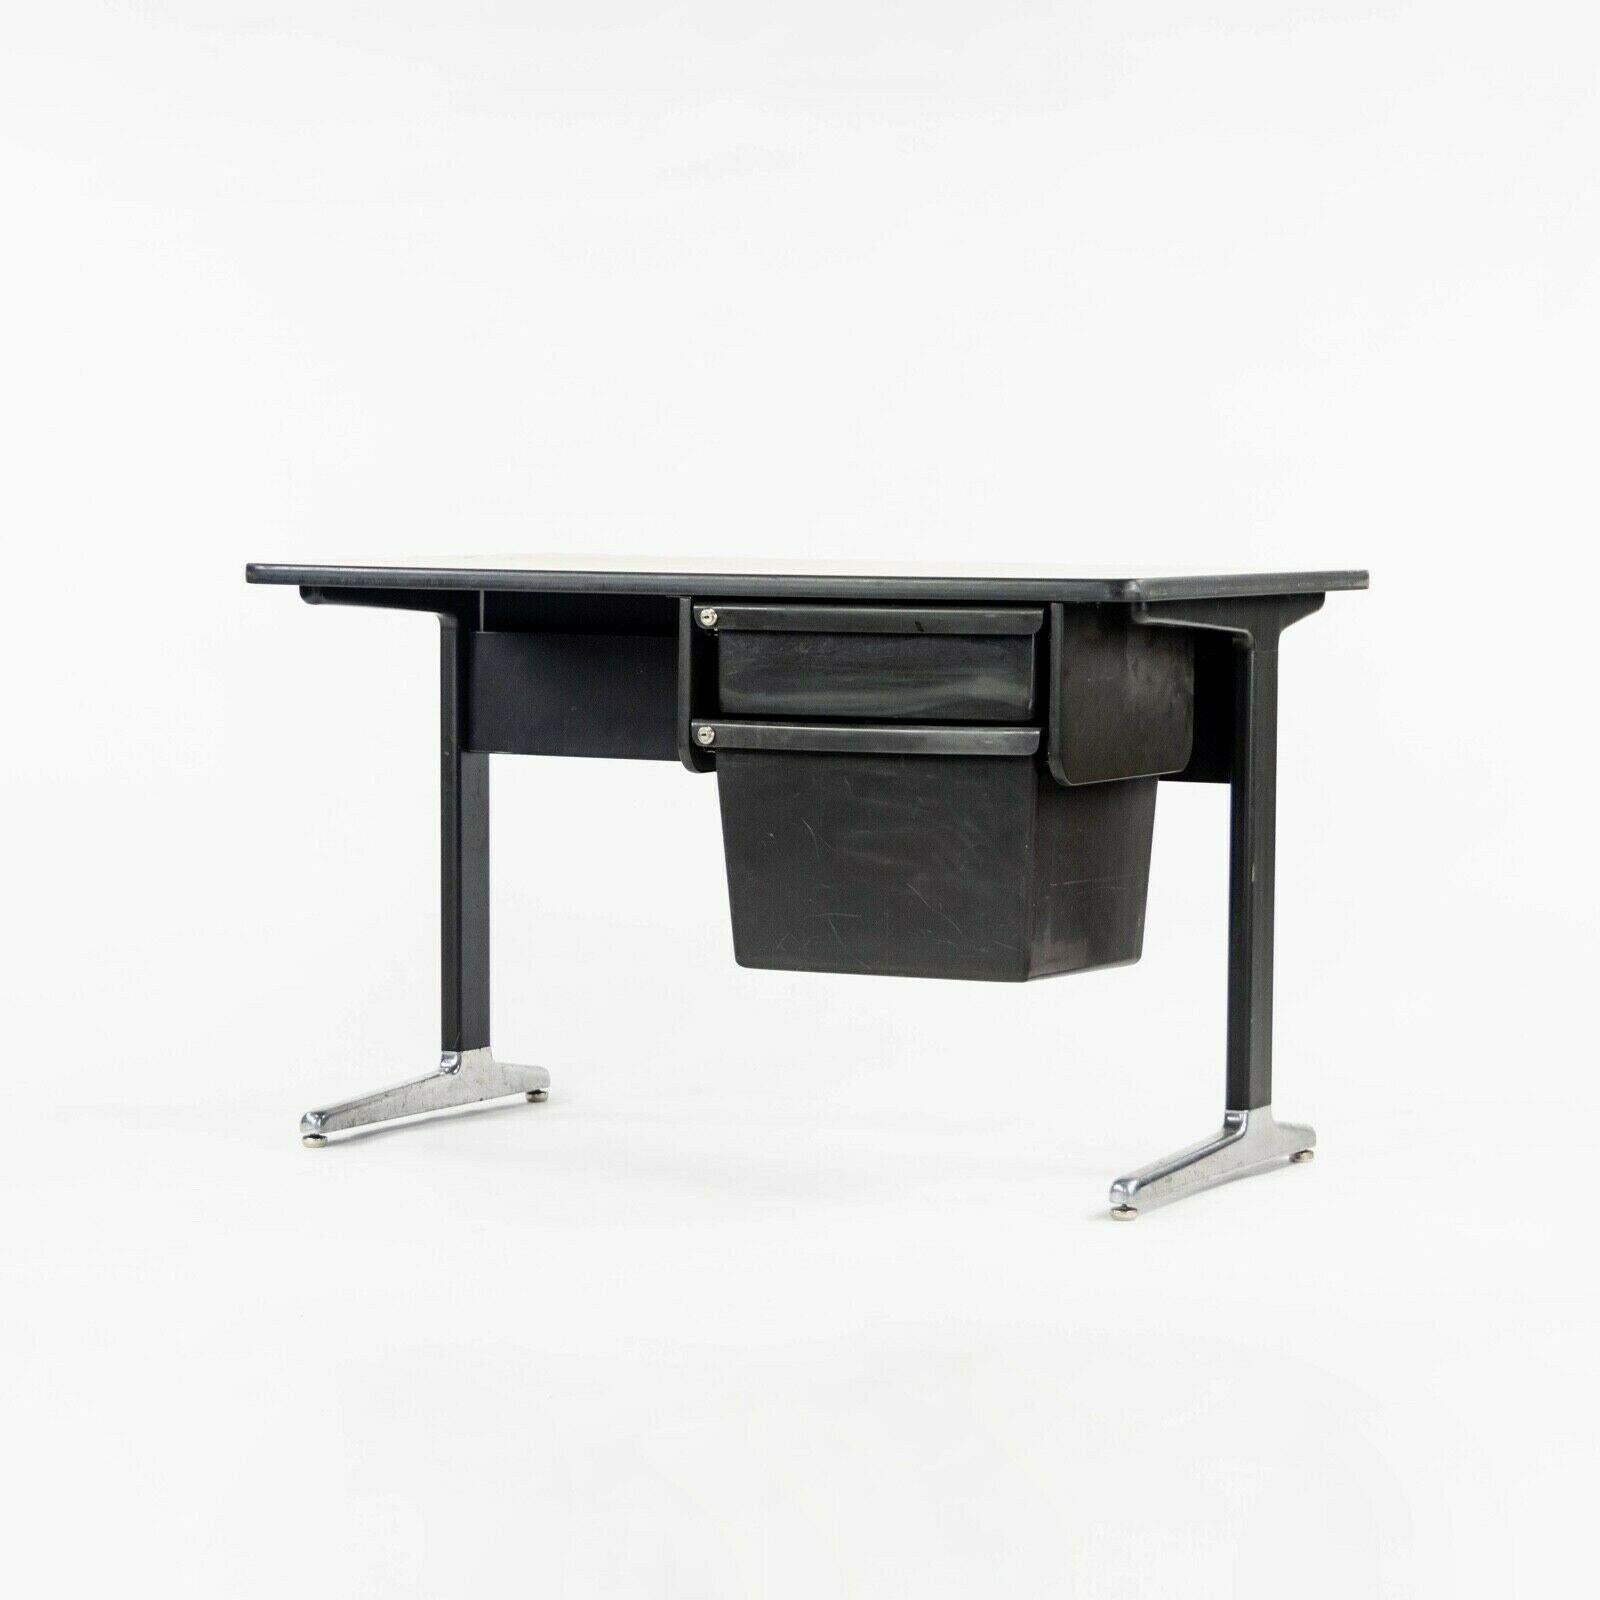 Listed for sale is a 1970s vintage Herman Miller Action Office desk, designed by George Nelson. This is a classic example of Nelson's work with great emphasis on simplicity and functionality. It has cast aluminum legs and basket-like pull-out